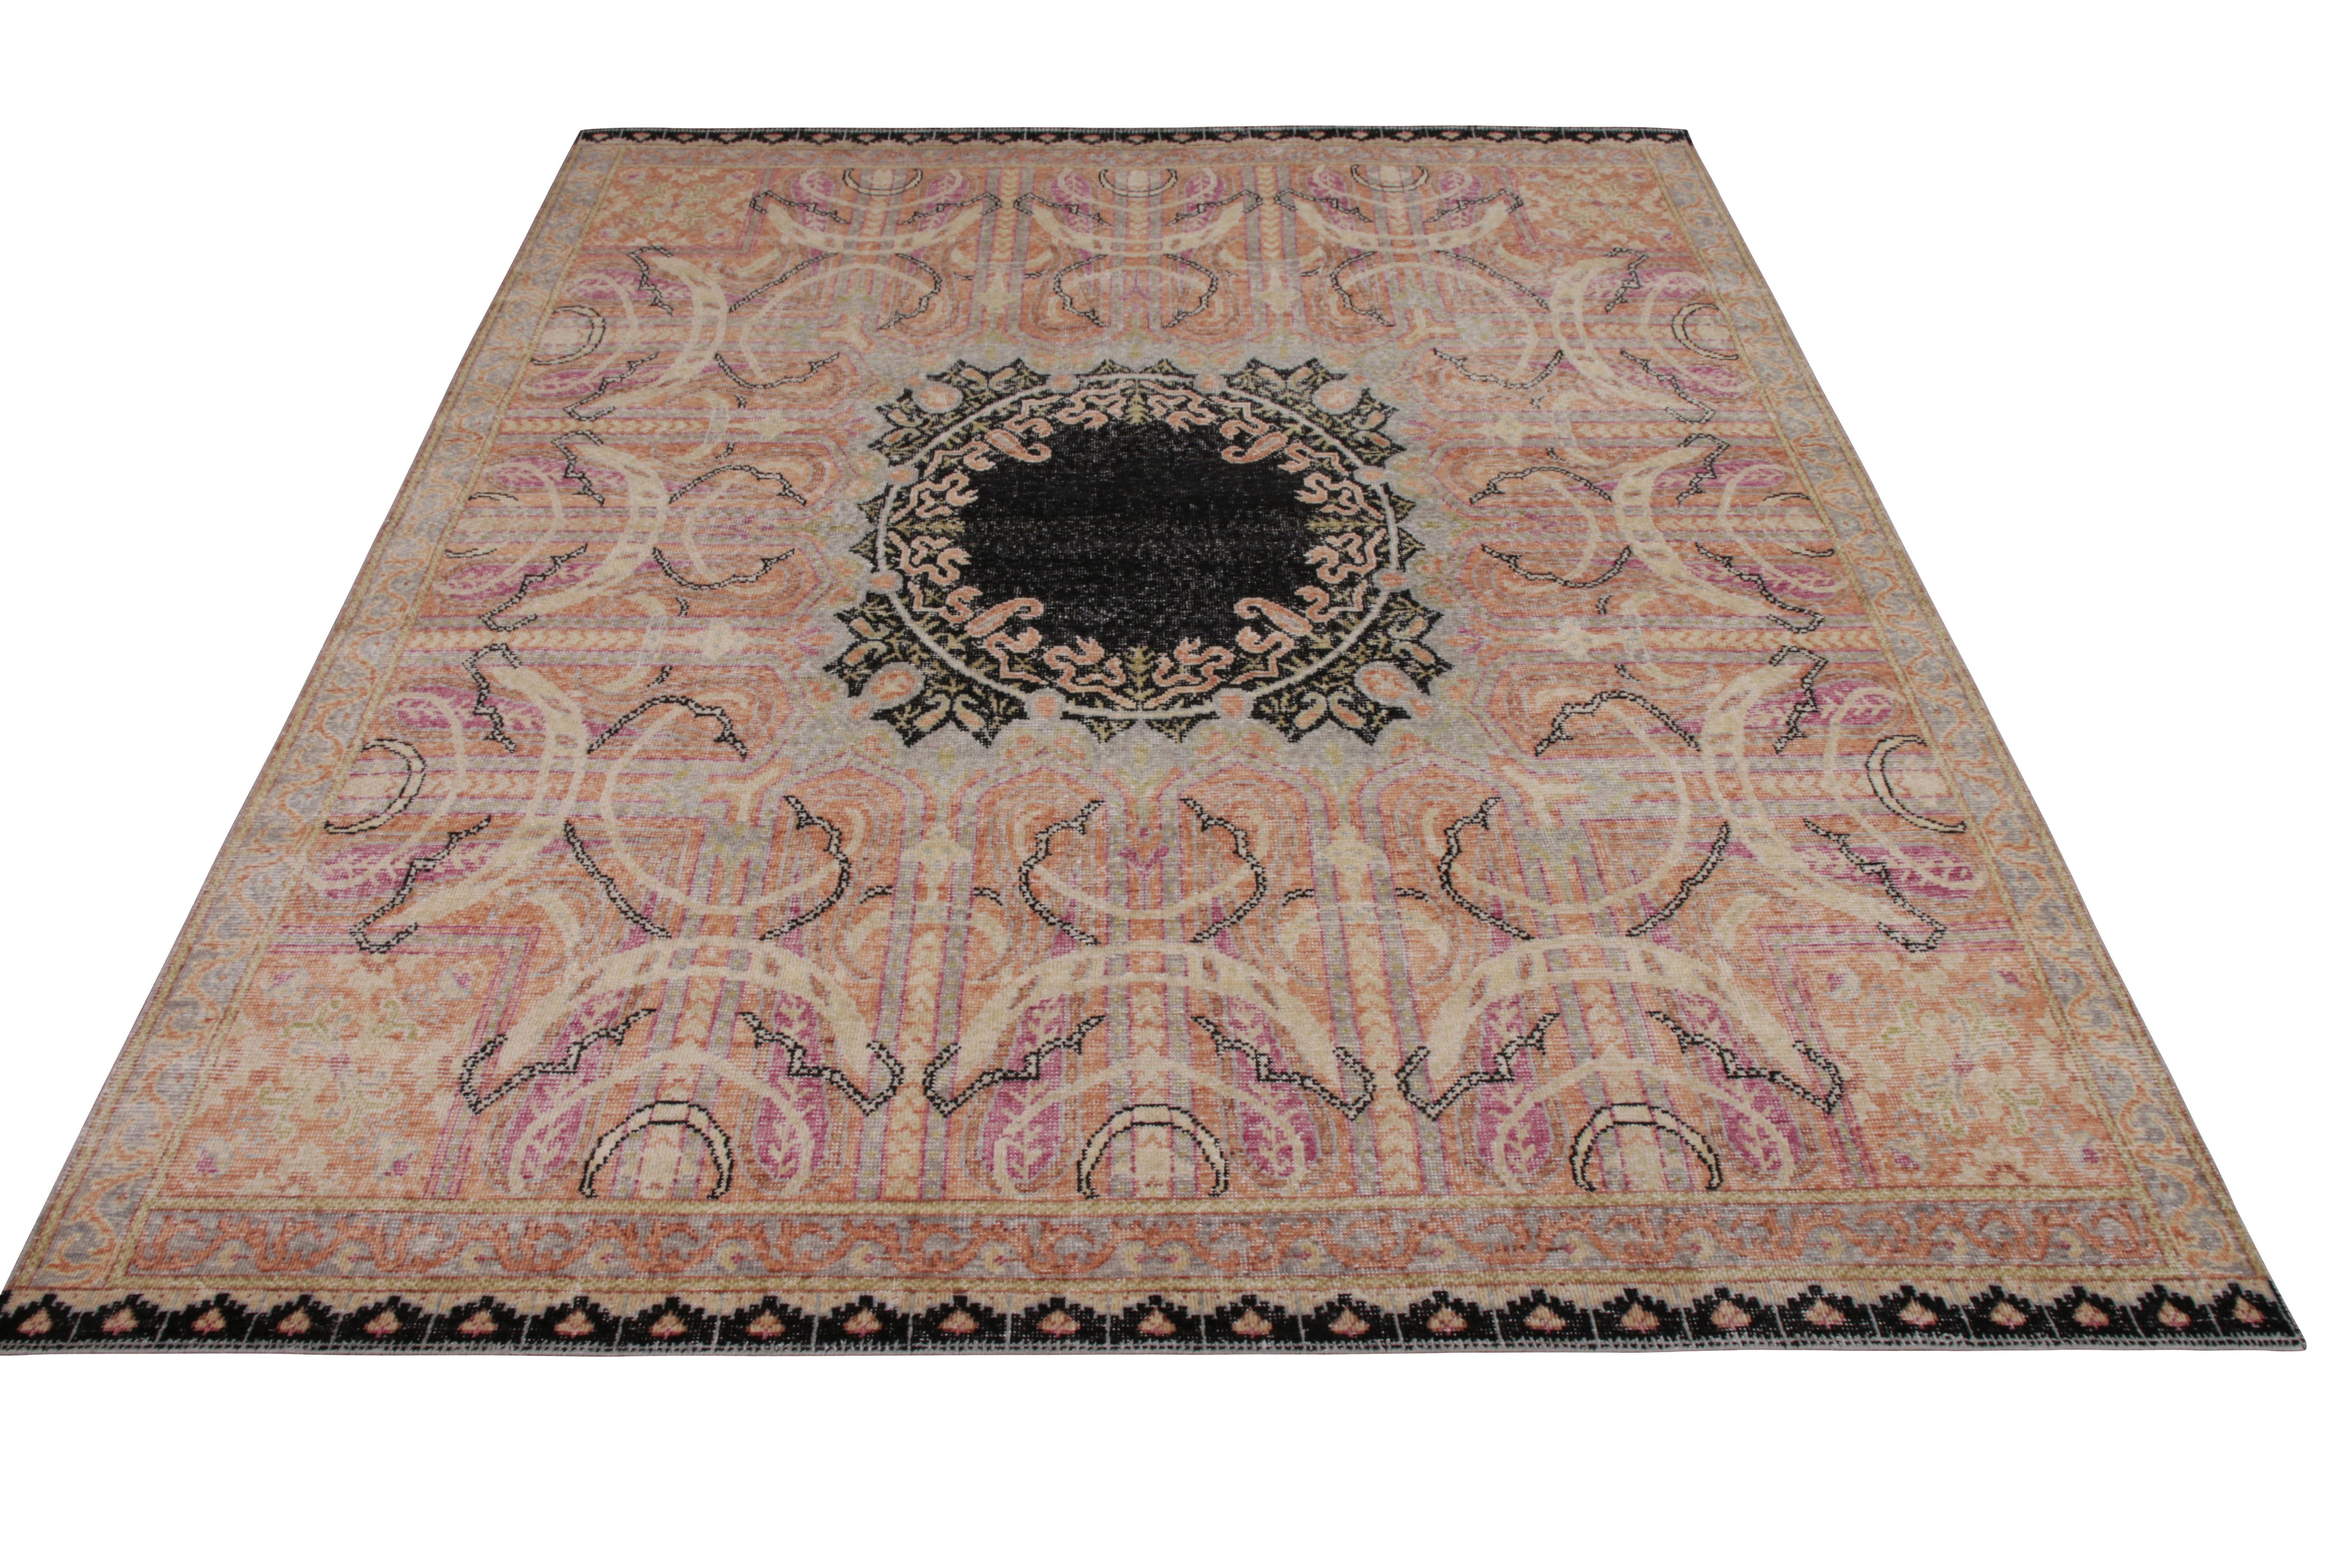 Inspired from a Persian shawl design in pink and black, joining the Homage Collection by Rug & Kilim. Hand knotted in wool, this 8 x 10 exemplifies a marriage of this collection’s distressed texture with an elegant floral medallion style. An